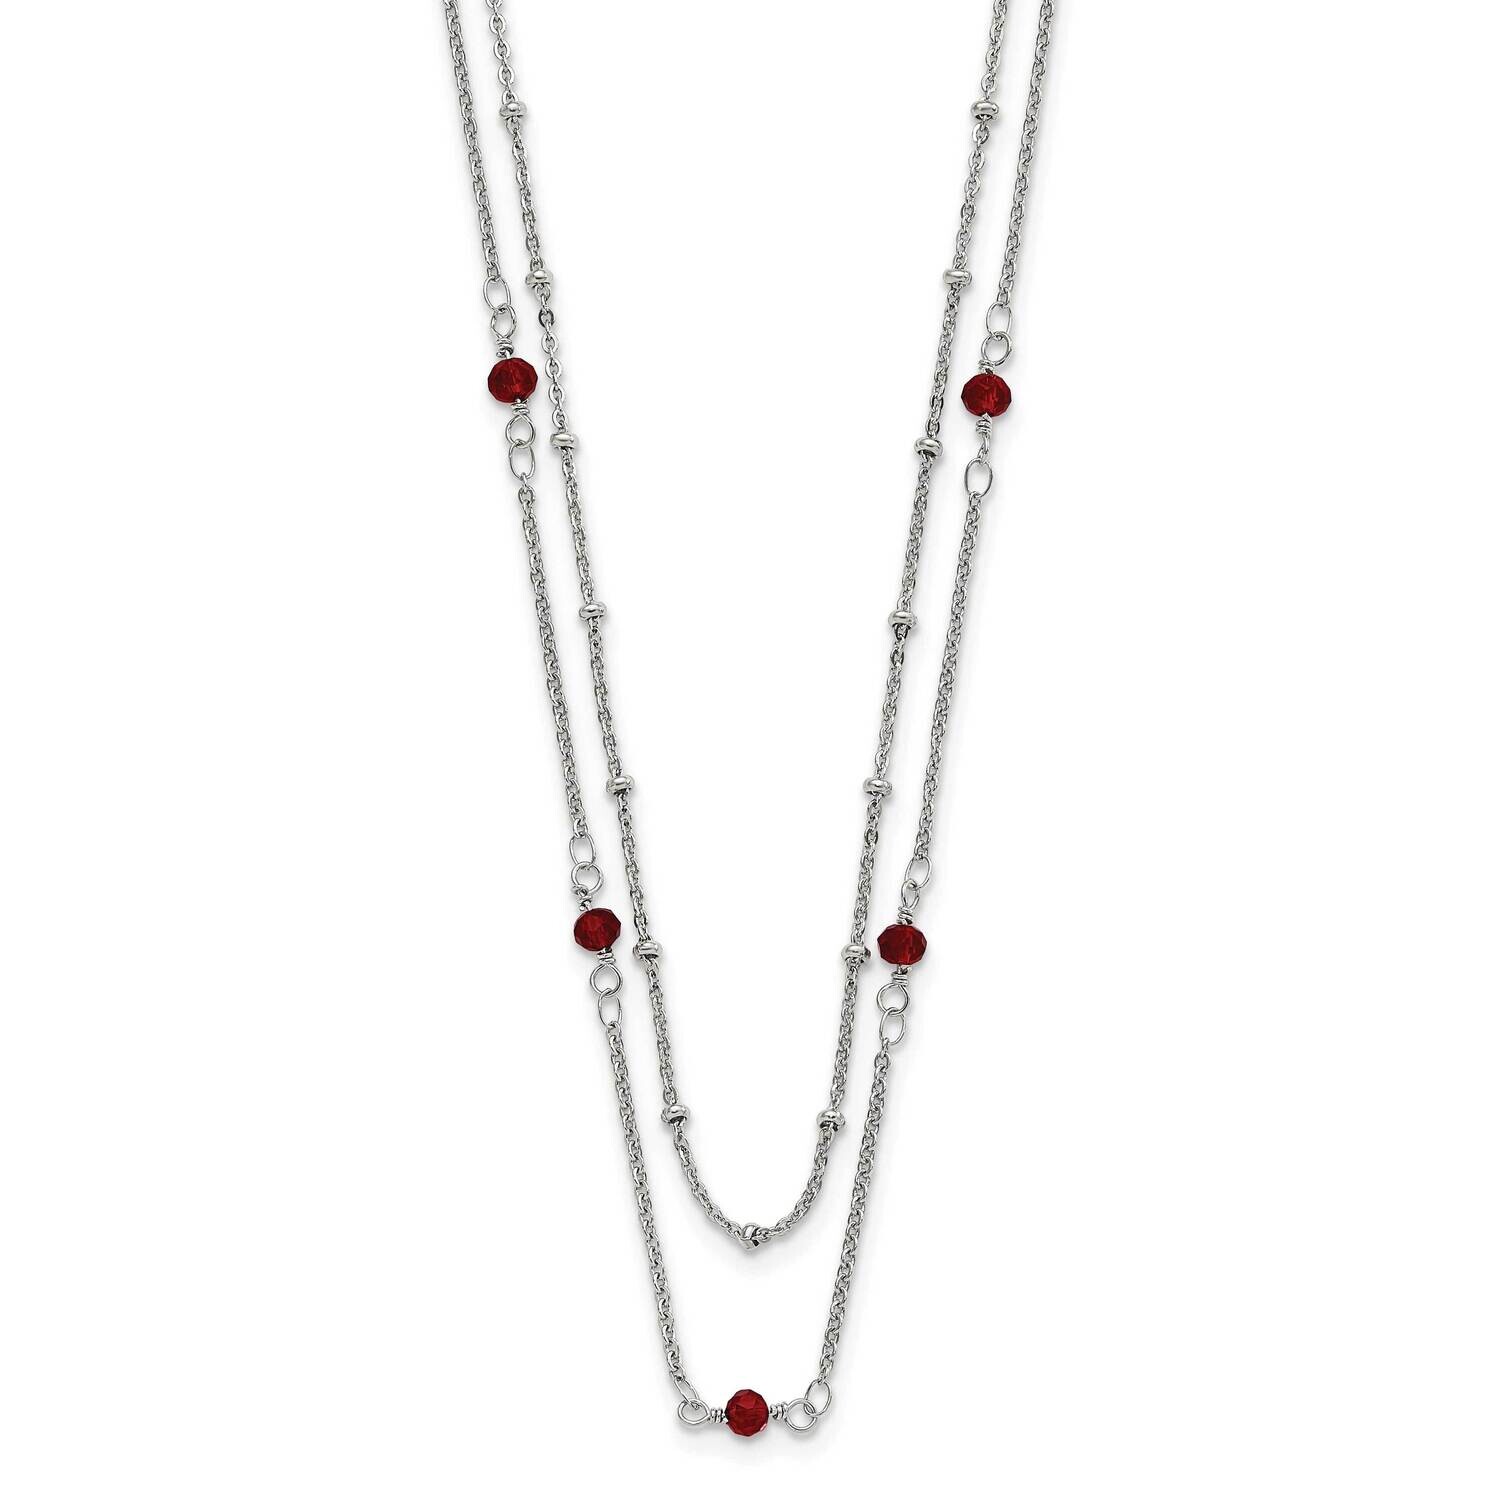 Chisel Polished 2-StrRed Crystal Beaded 16 Inch 1 Inch Extension Necklace Stainless Steel SRN3104-16